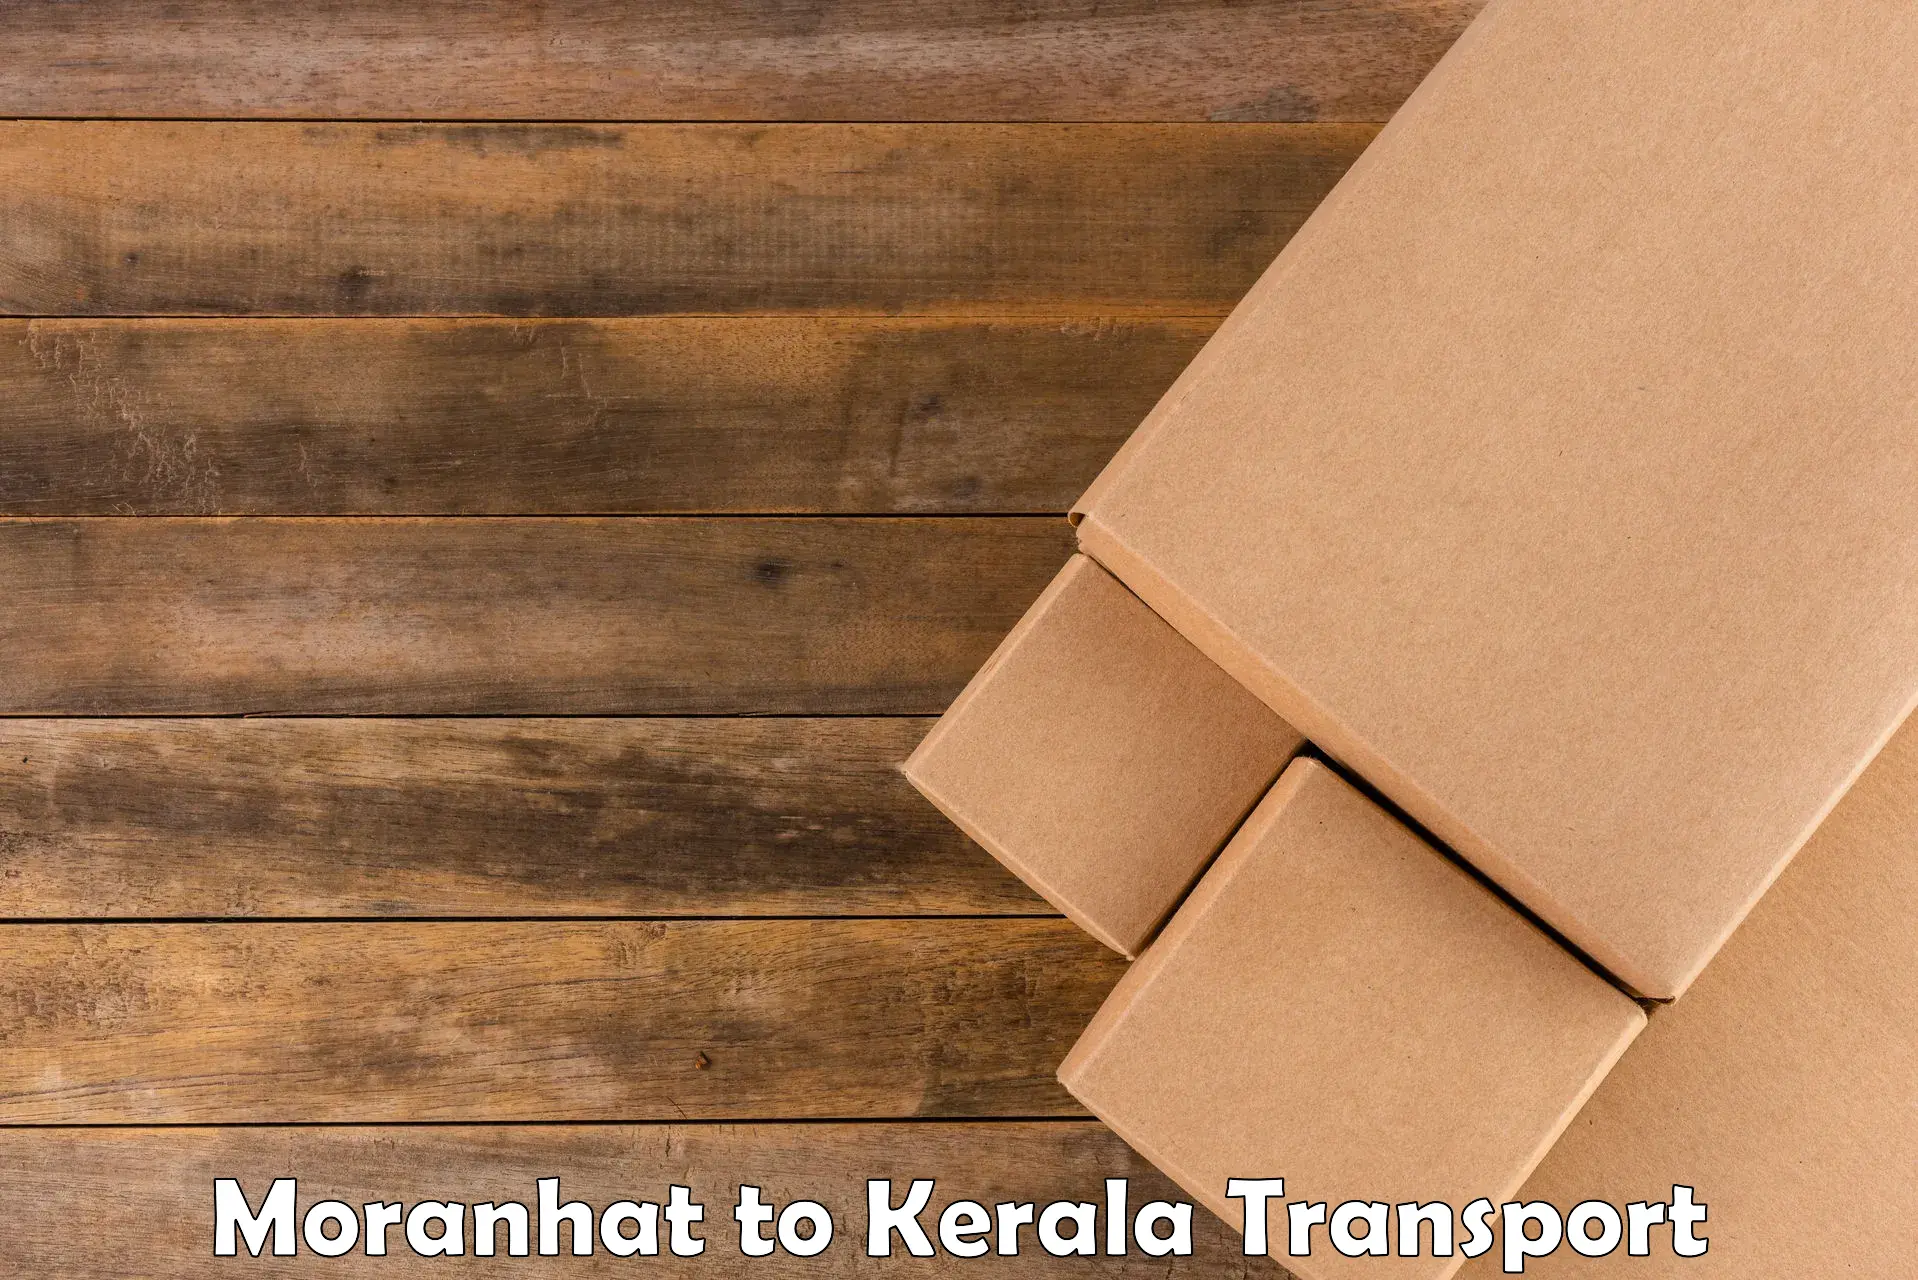 Two wheeler parcel service Moranhat to Valanchery